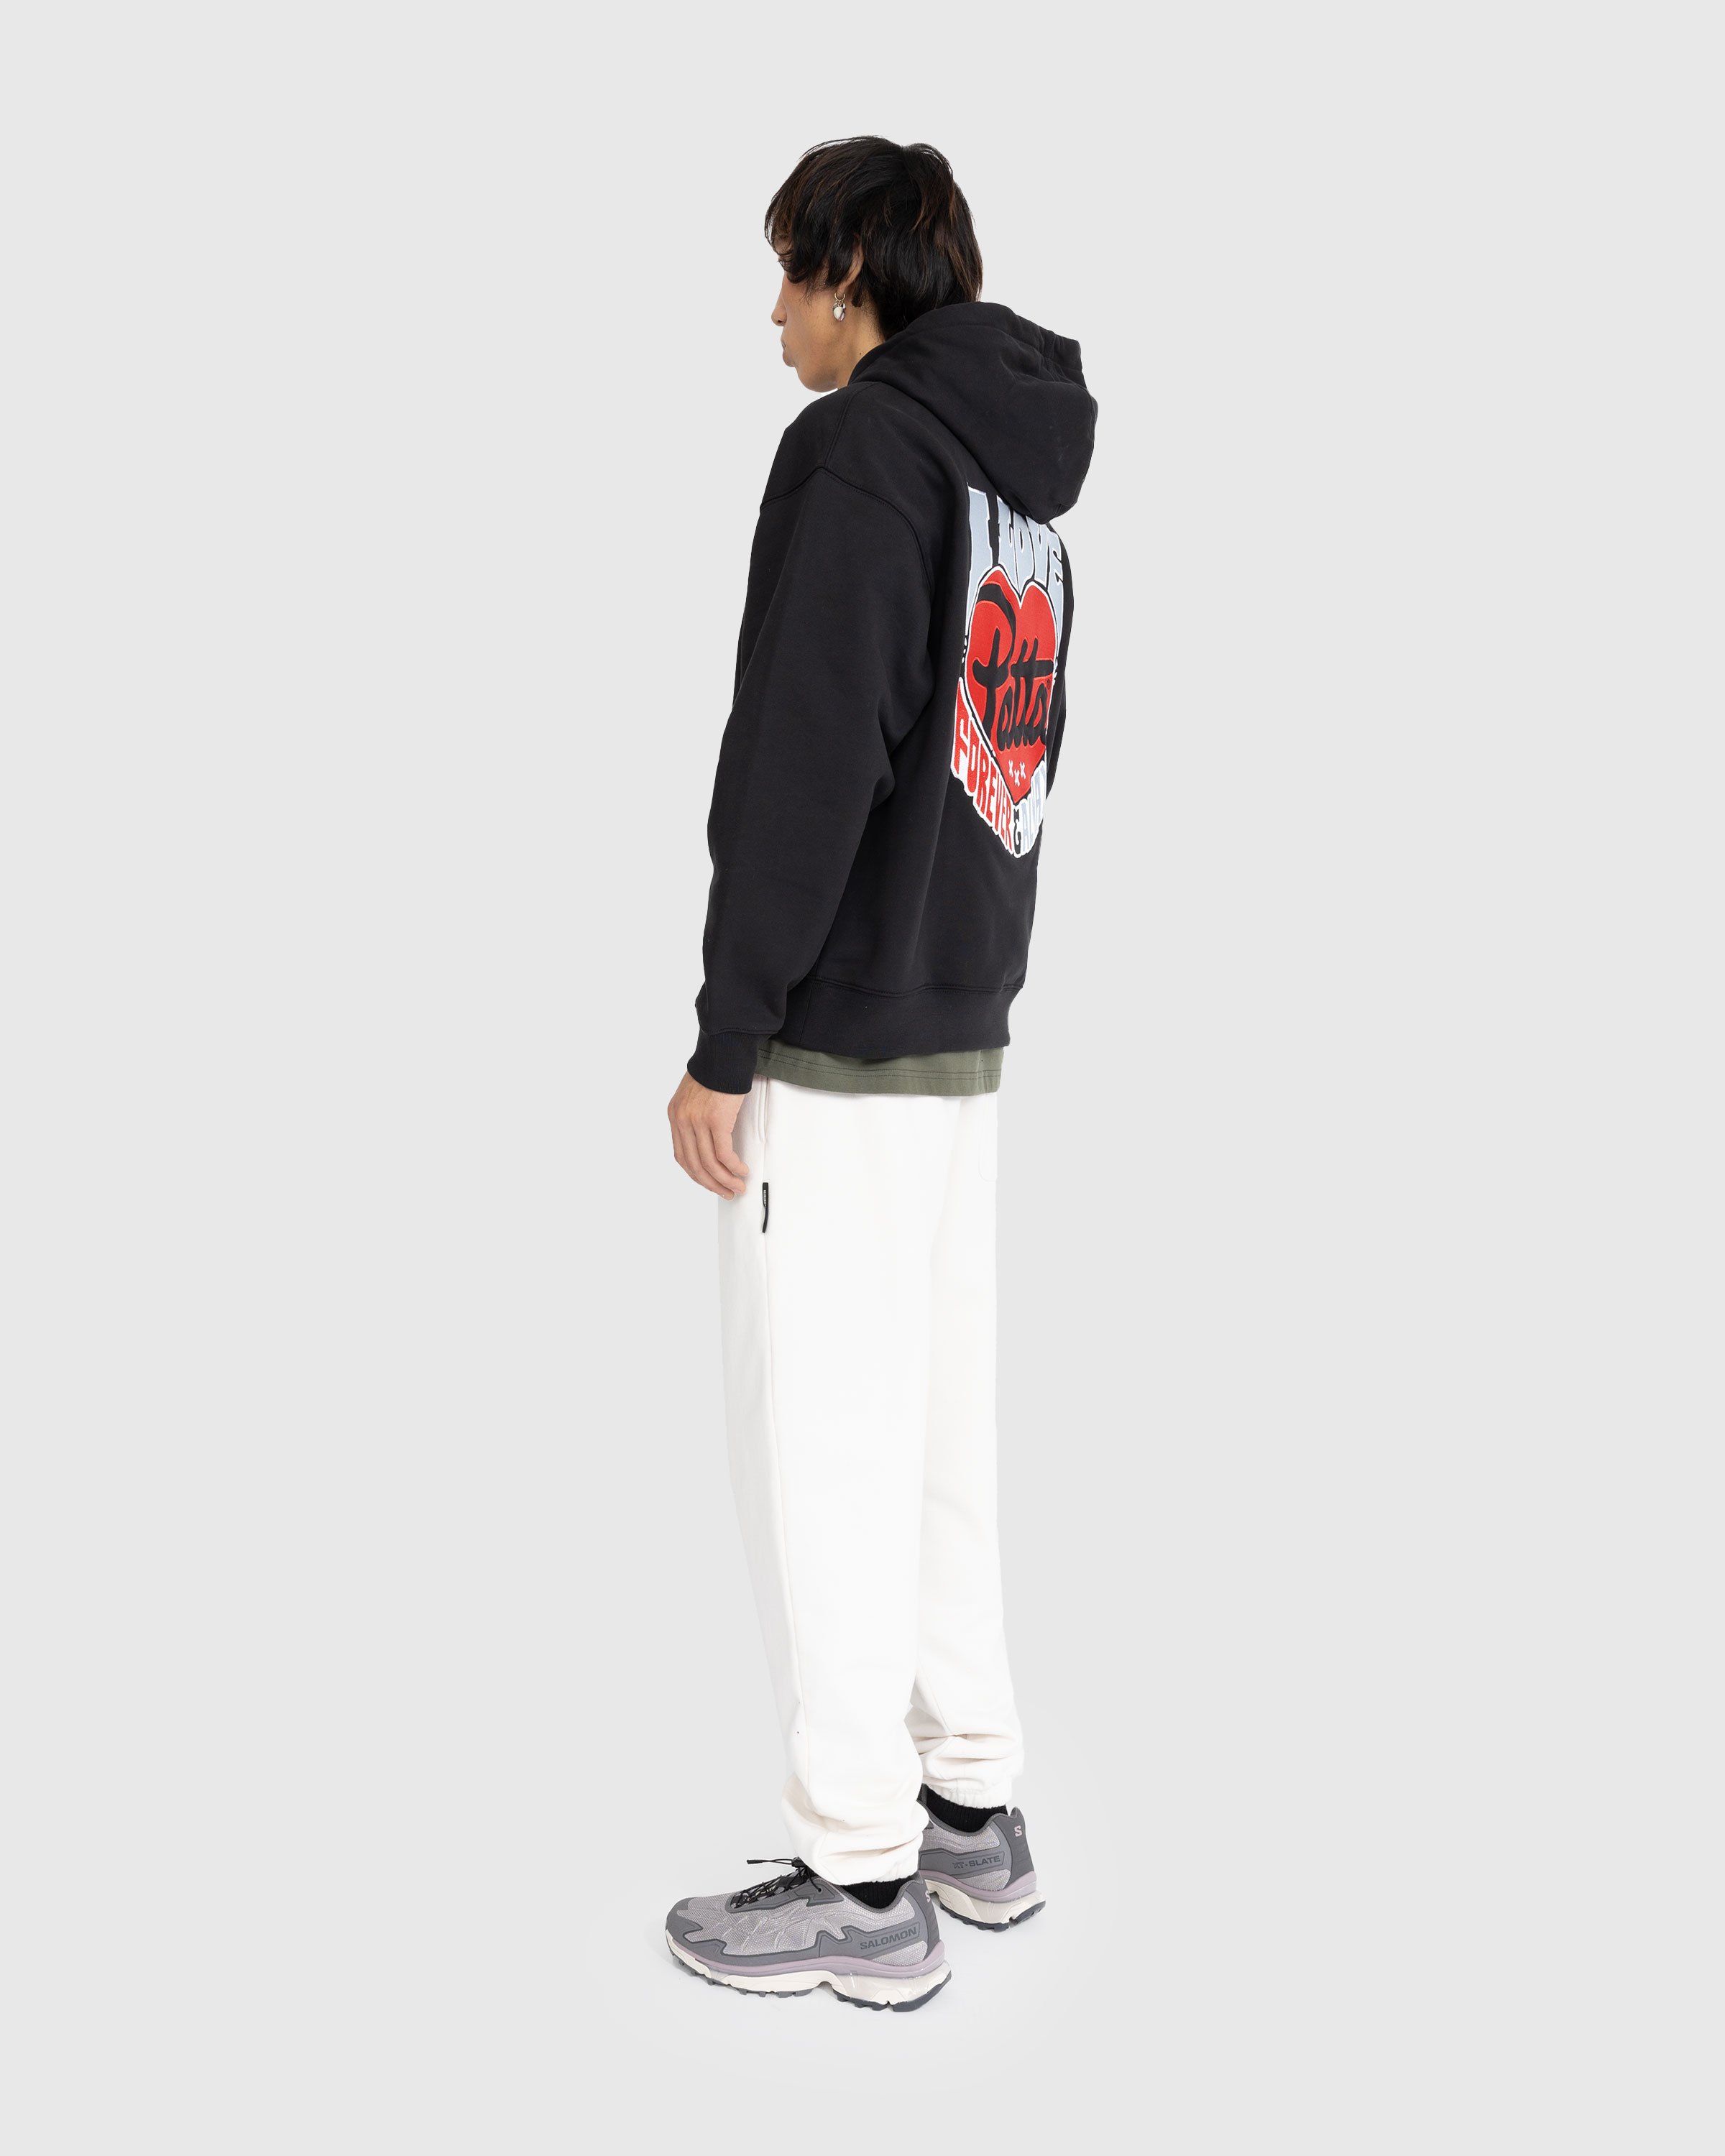 Patta - Forever and Always Boxy Hoodie Black - Clothing - Black - Image 3